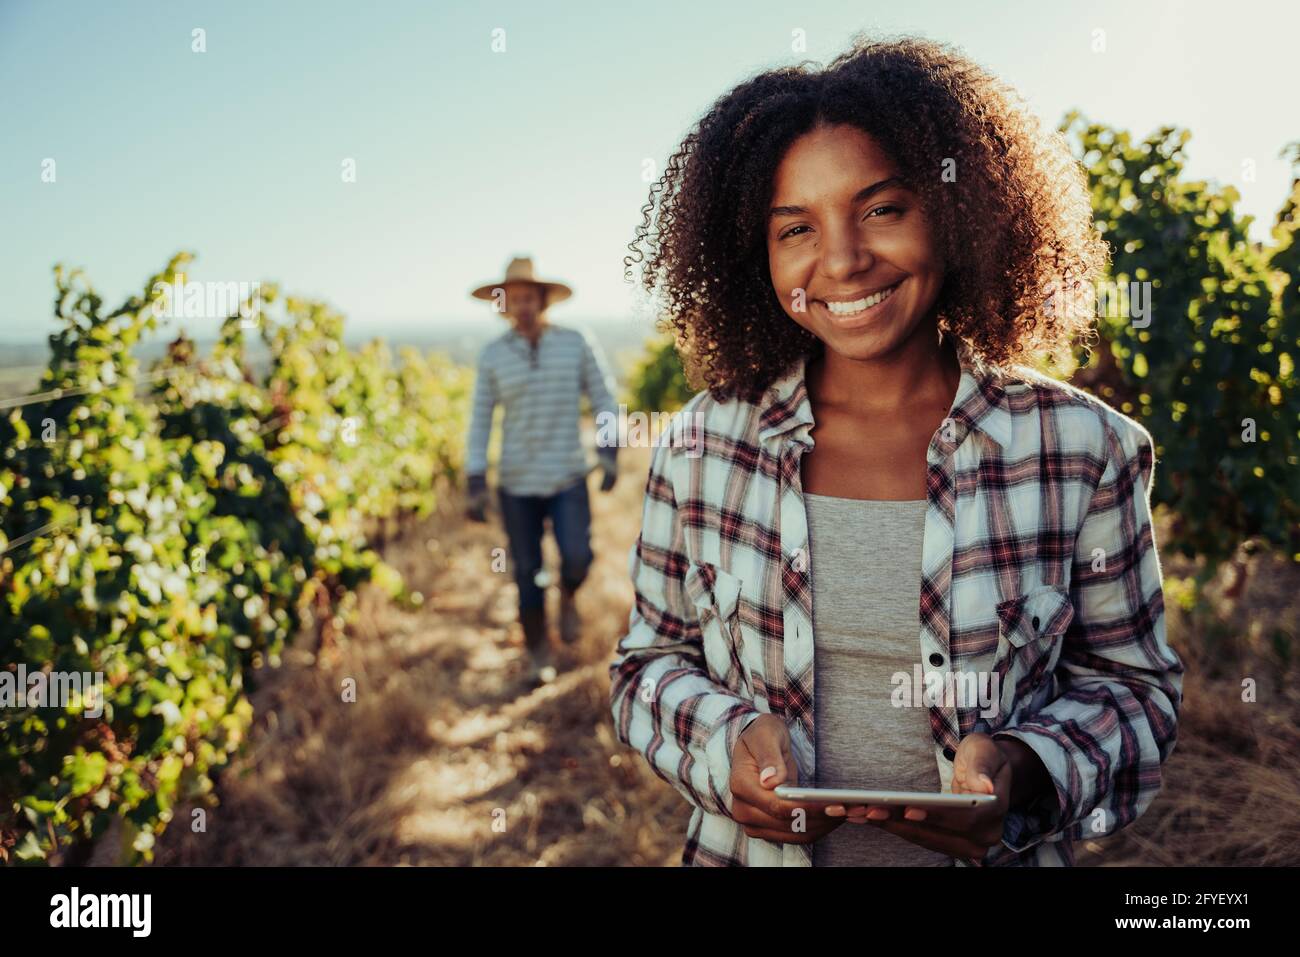 Female farmer standing in vineyards holding digital tablet while male colleague examines plants behind Stock Photo